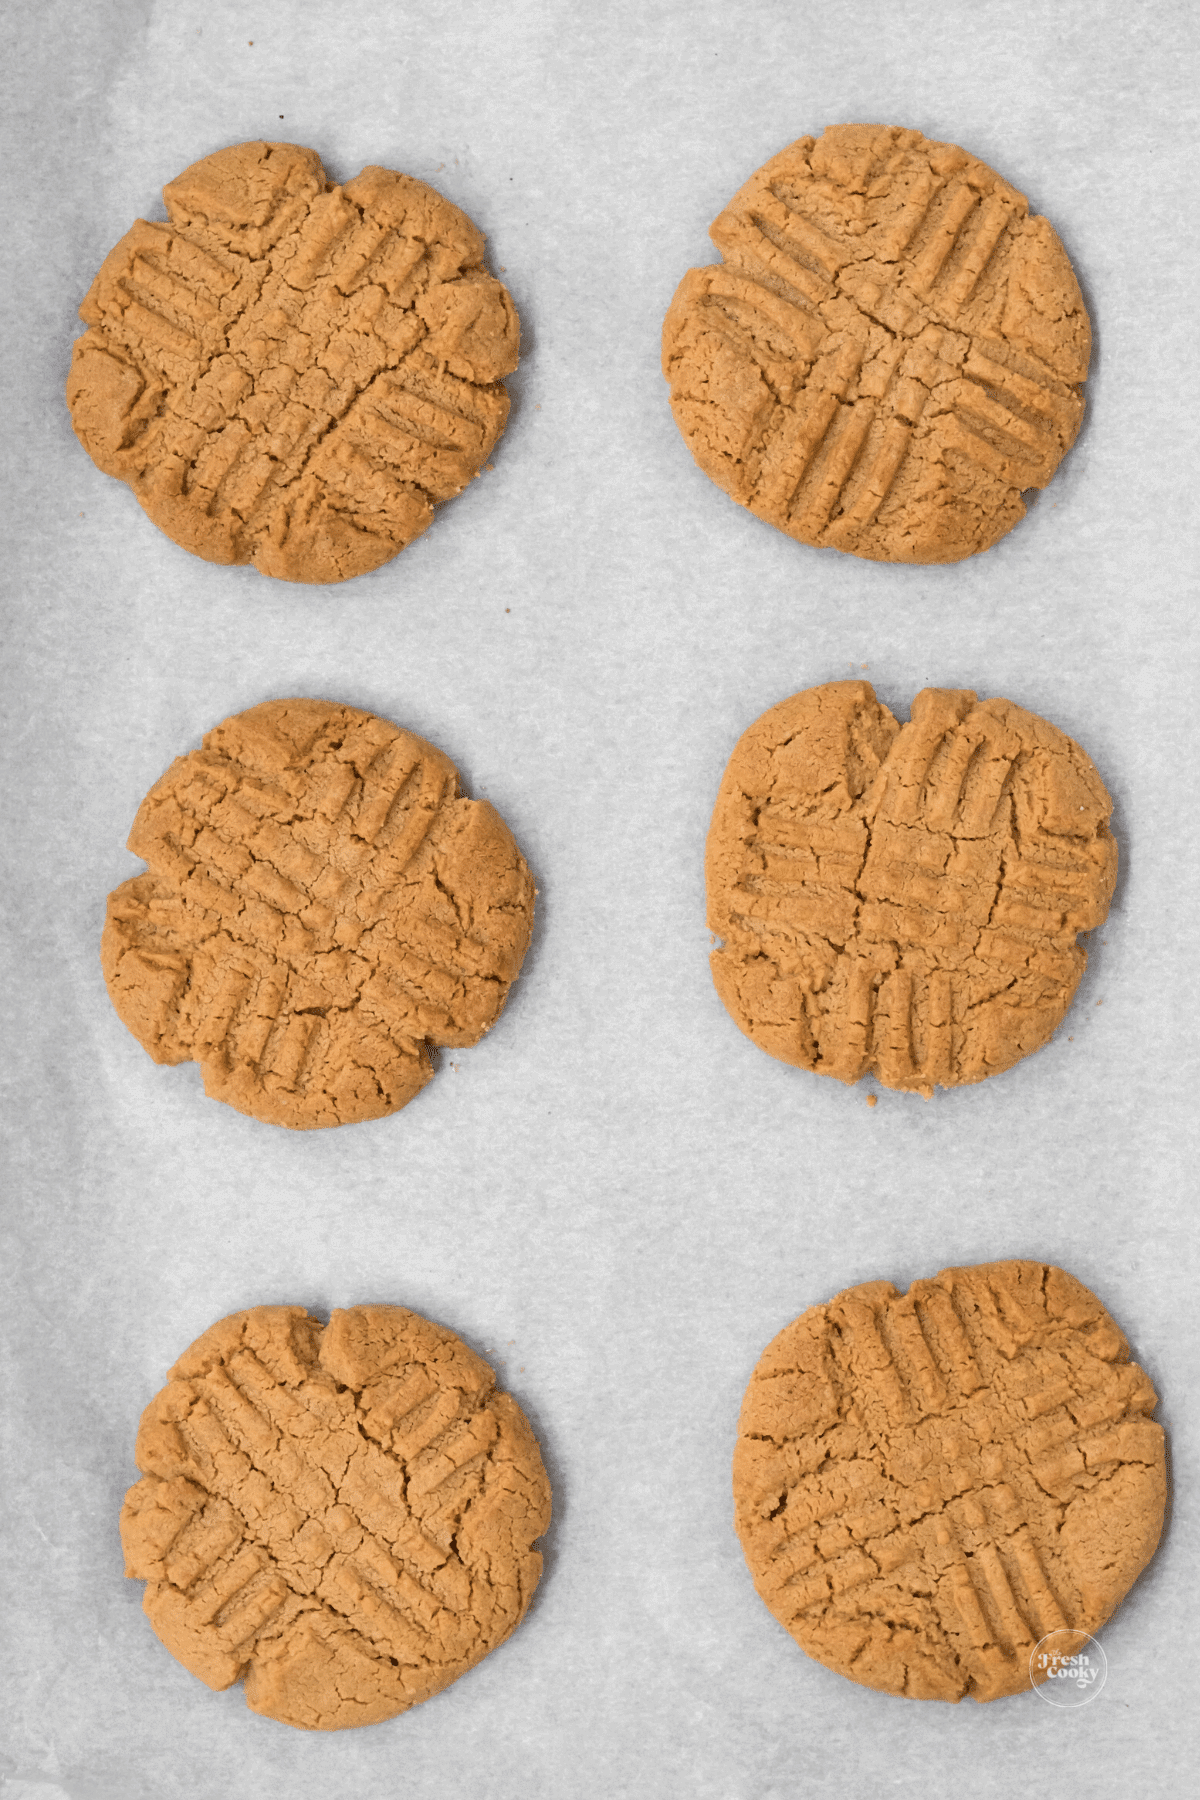 just baked peanut butter cookies before adding sugar.